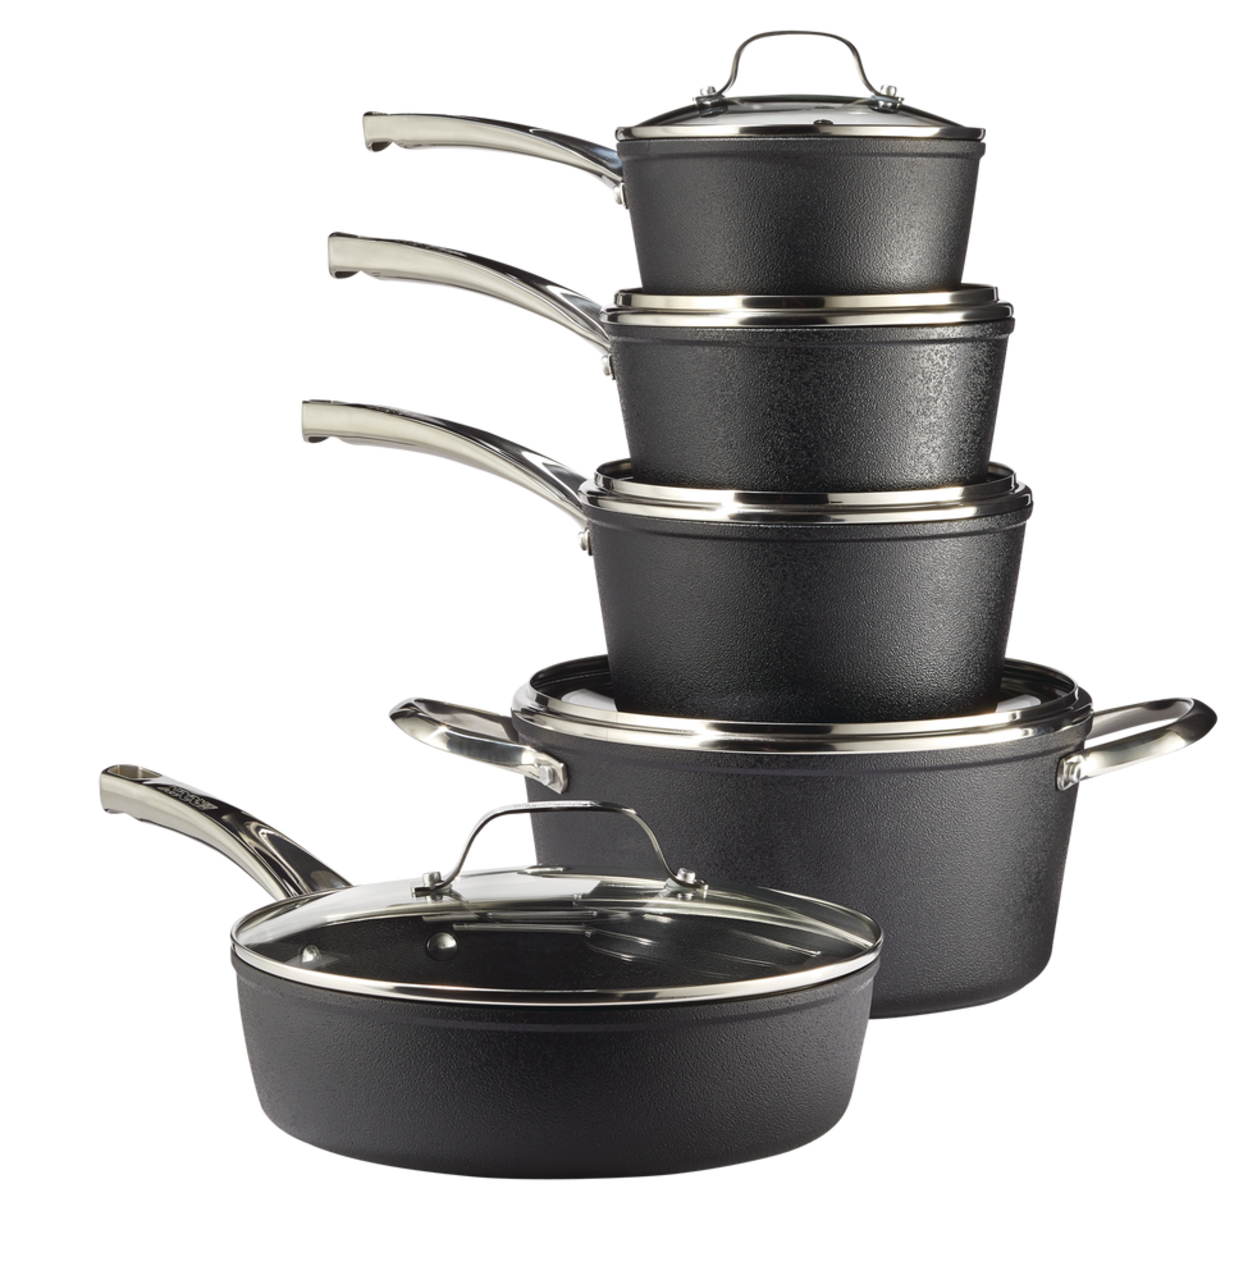 https://media-www.canadiantire.ca/product/living/kitchen/cookware/3999520/10-pc-rock-diamond-cookset-matching-20cm-frypan-e277657b-54a4-45e6-a140-b8176a6c662b.png?imdensity=1&imwidth=1244&impolicy=mZoom